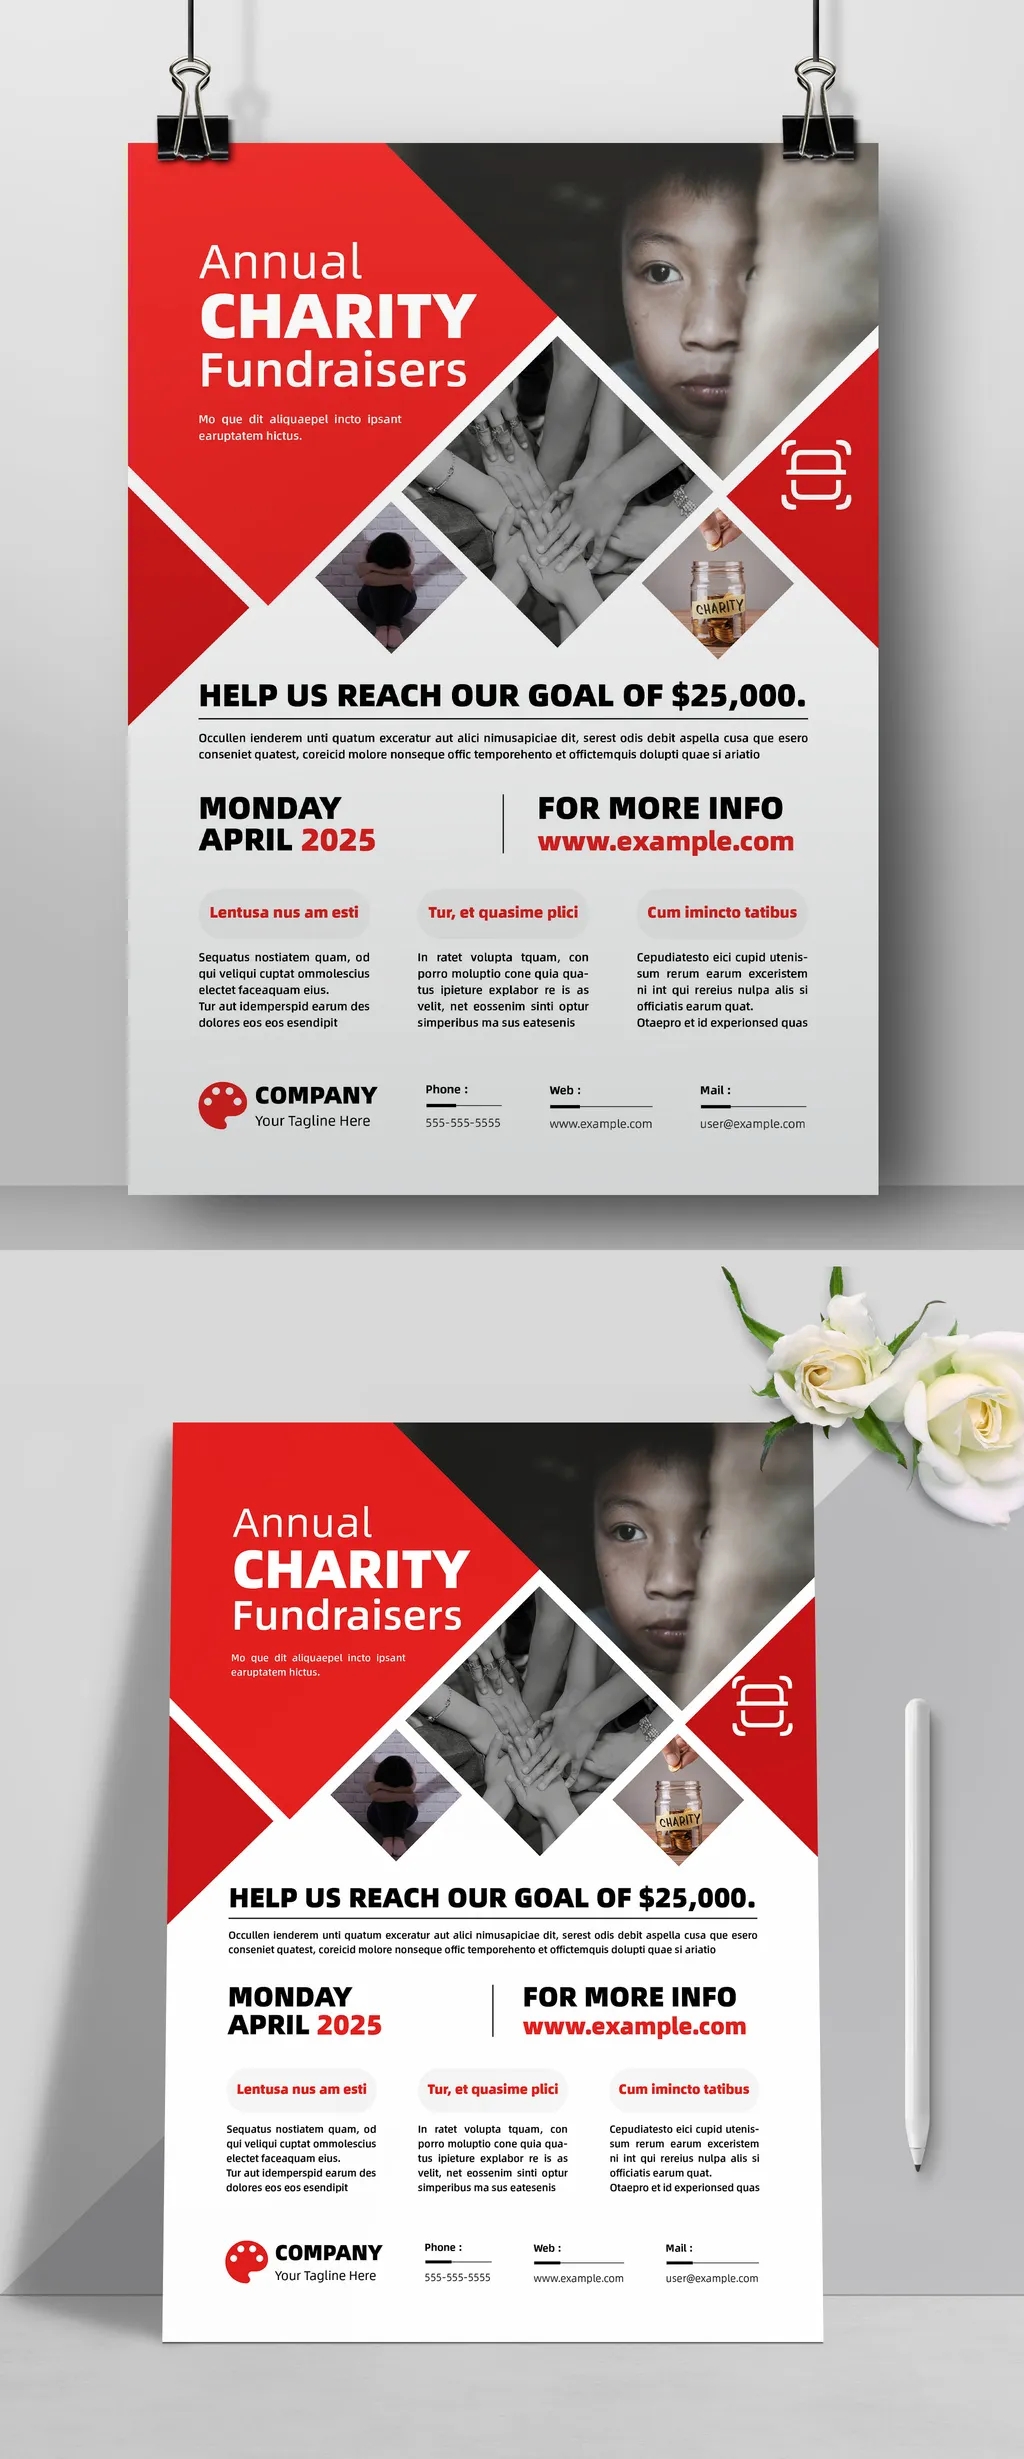 Adobestock - Annual Charity Fundraisers Flyer 722994599